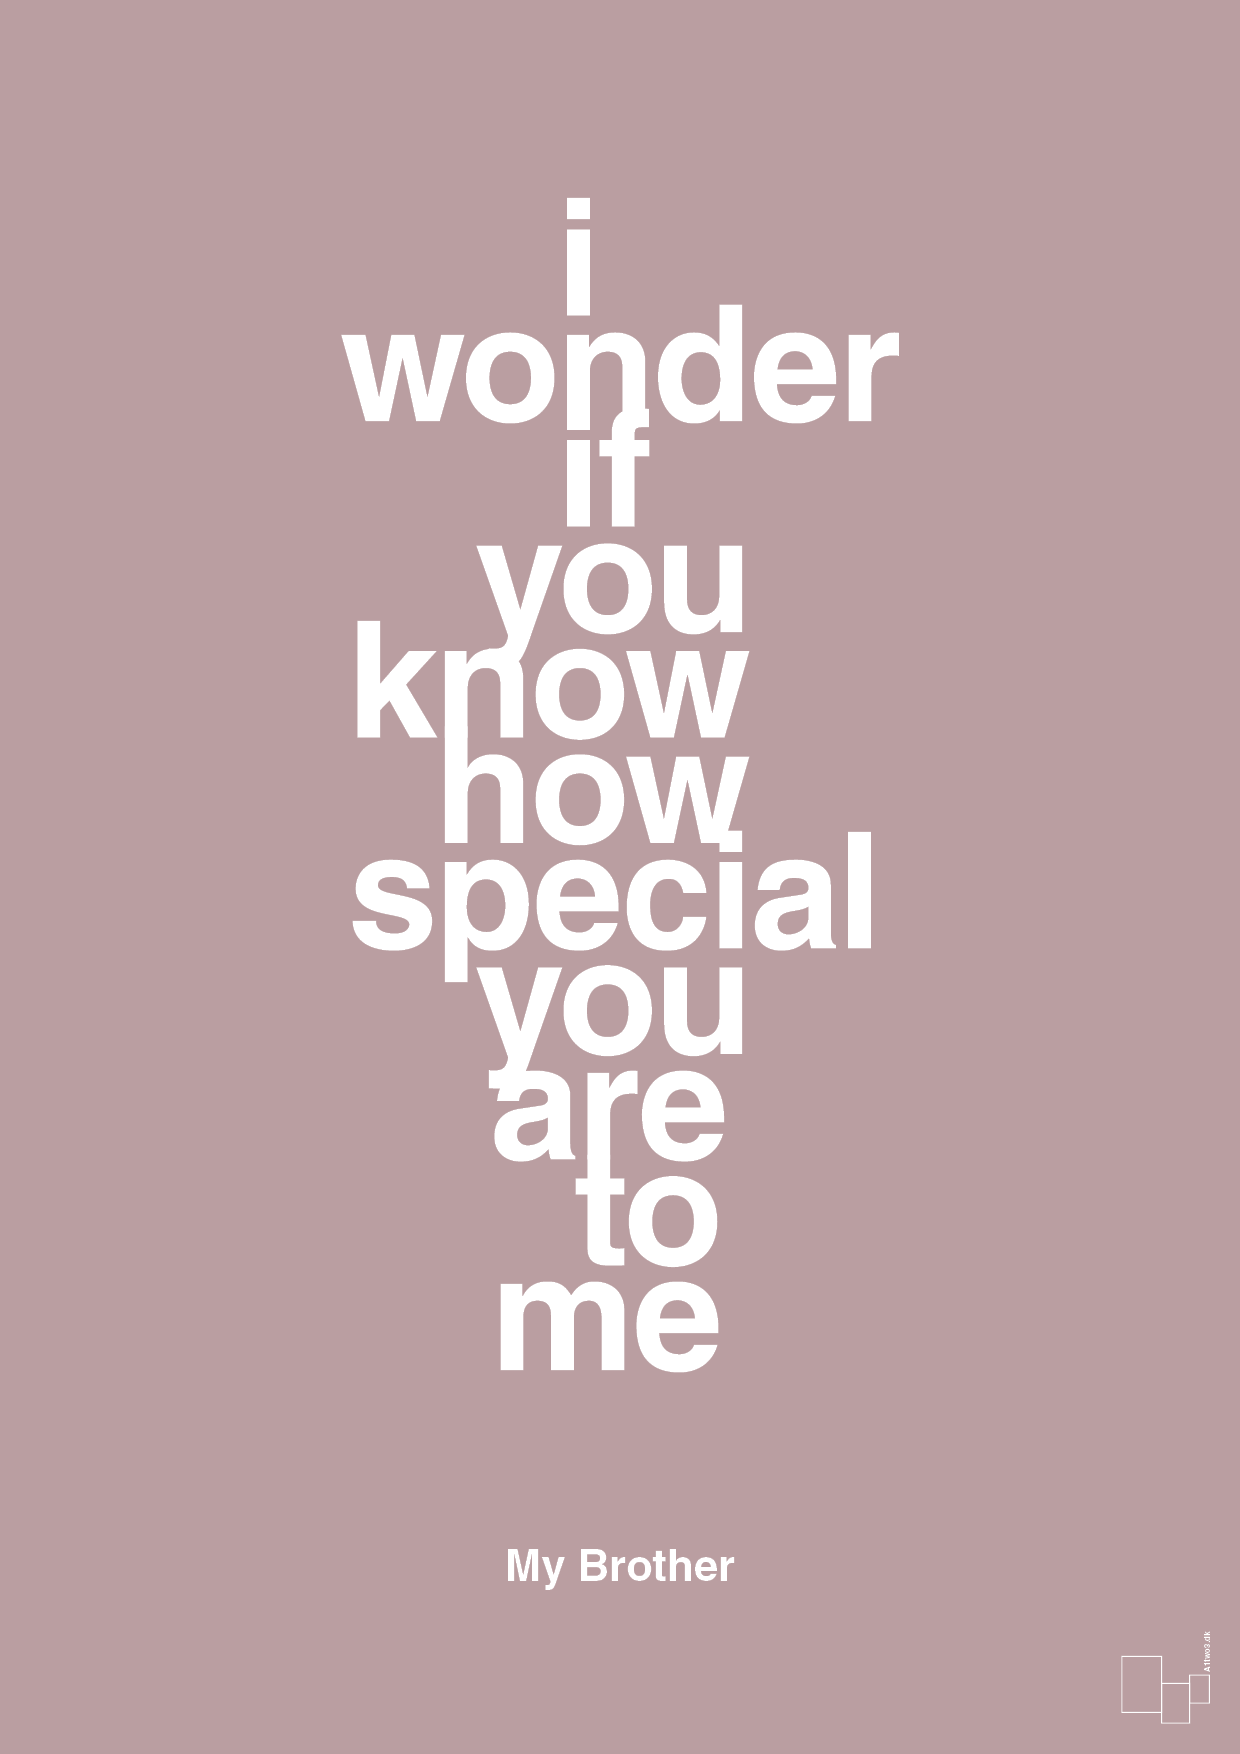 my brother - i wonder if you know how special you are to me - Plakat med Citater i Light Rose